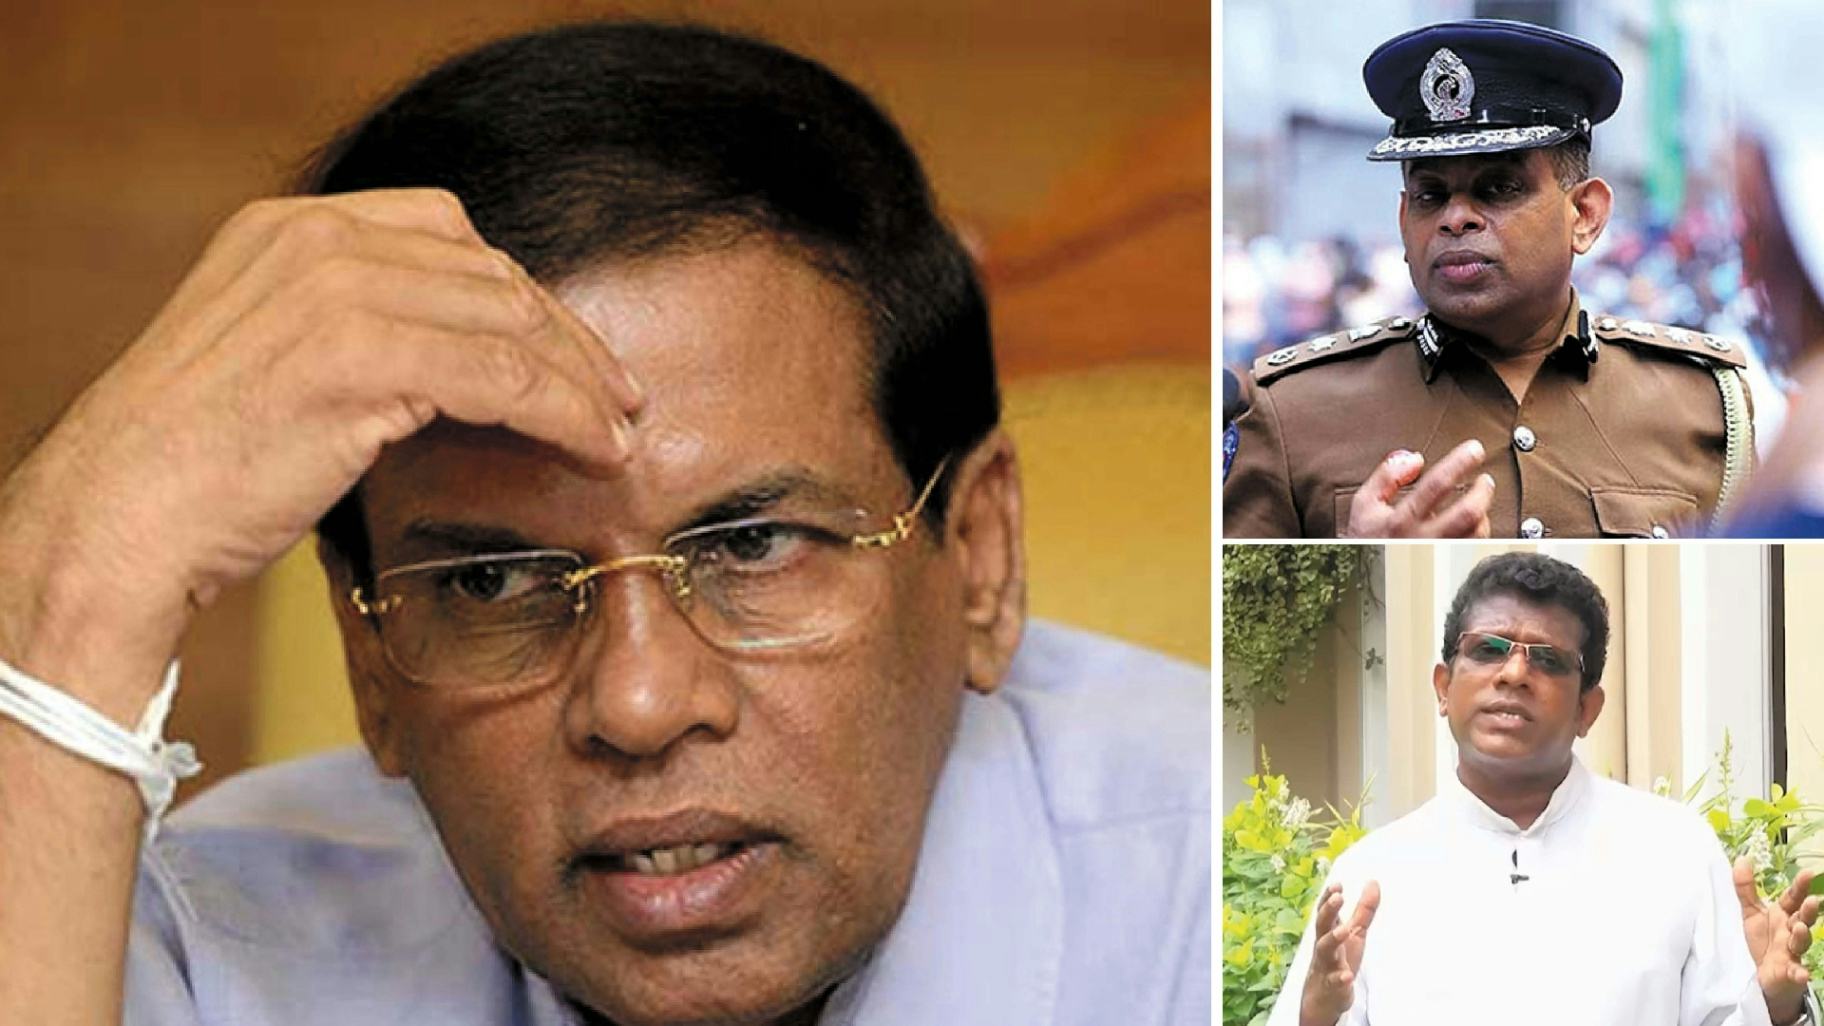 Easter Sunday Bombings: Fmr. Prez Sirisena to be questioned by CID today